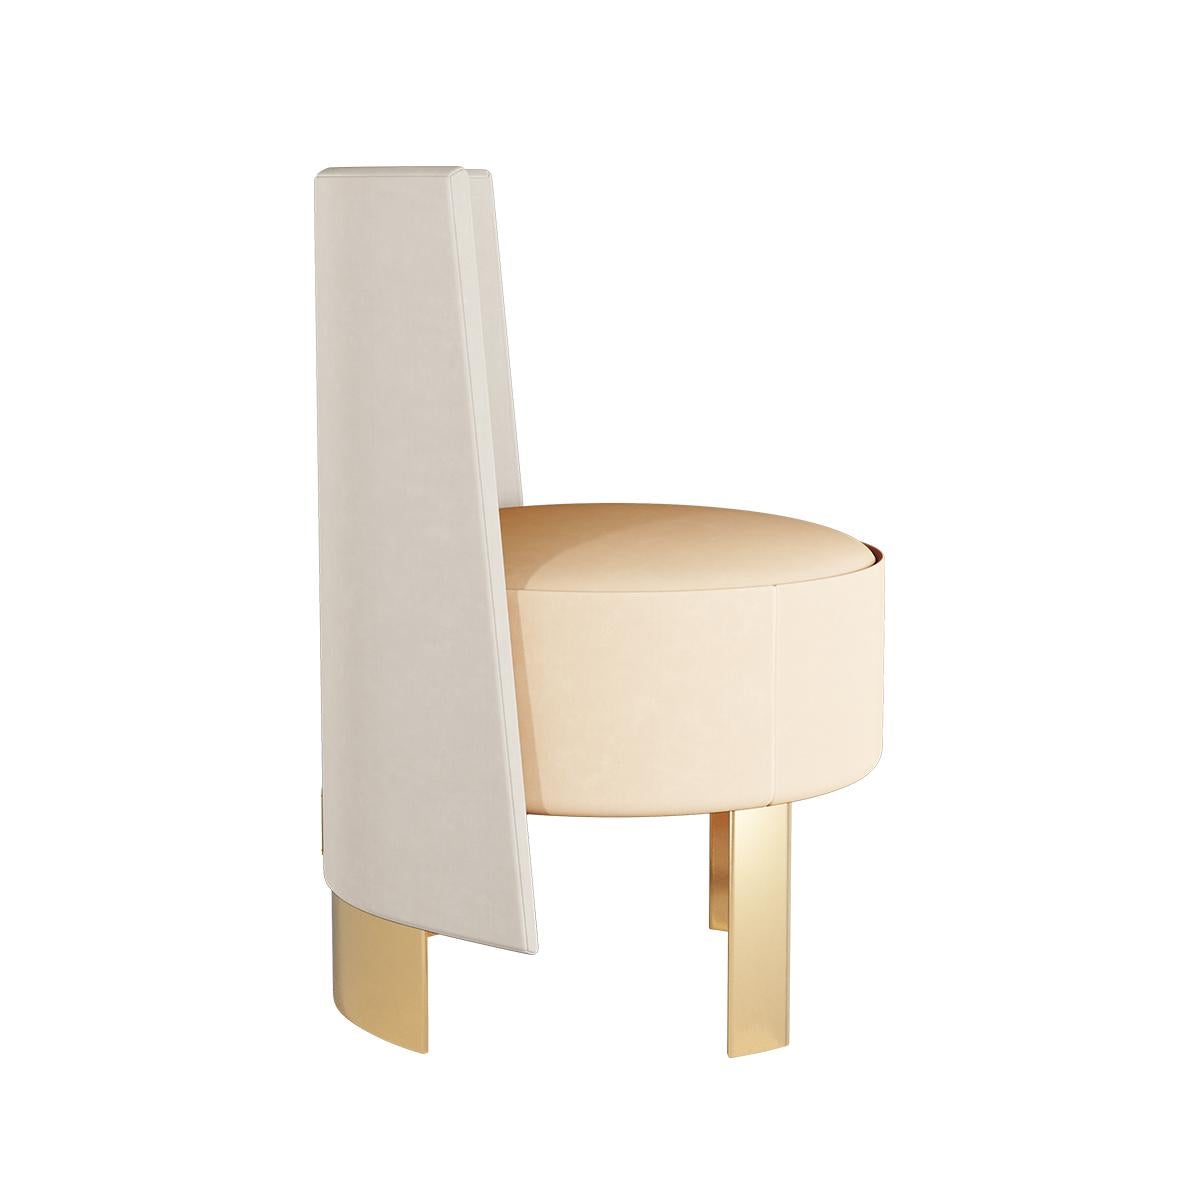 Portuguese Contemporary Neutral Colors Velvet Dining Chair with Gold Polished Brass Legs For Sale